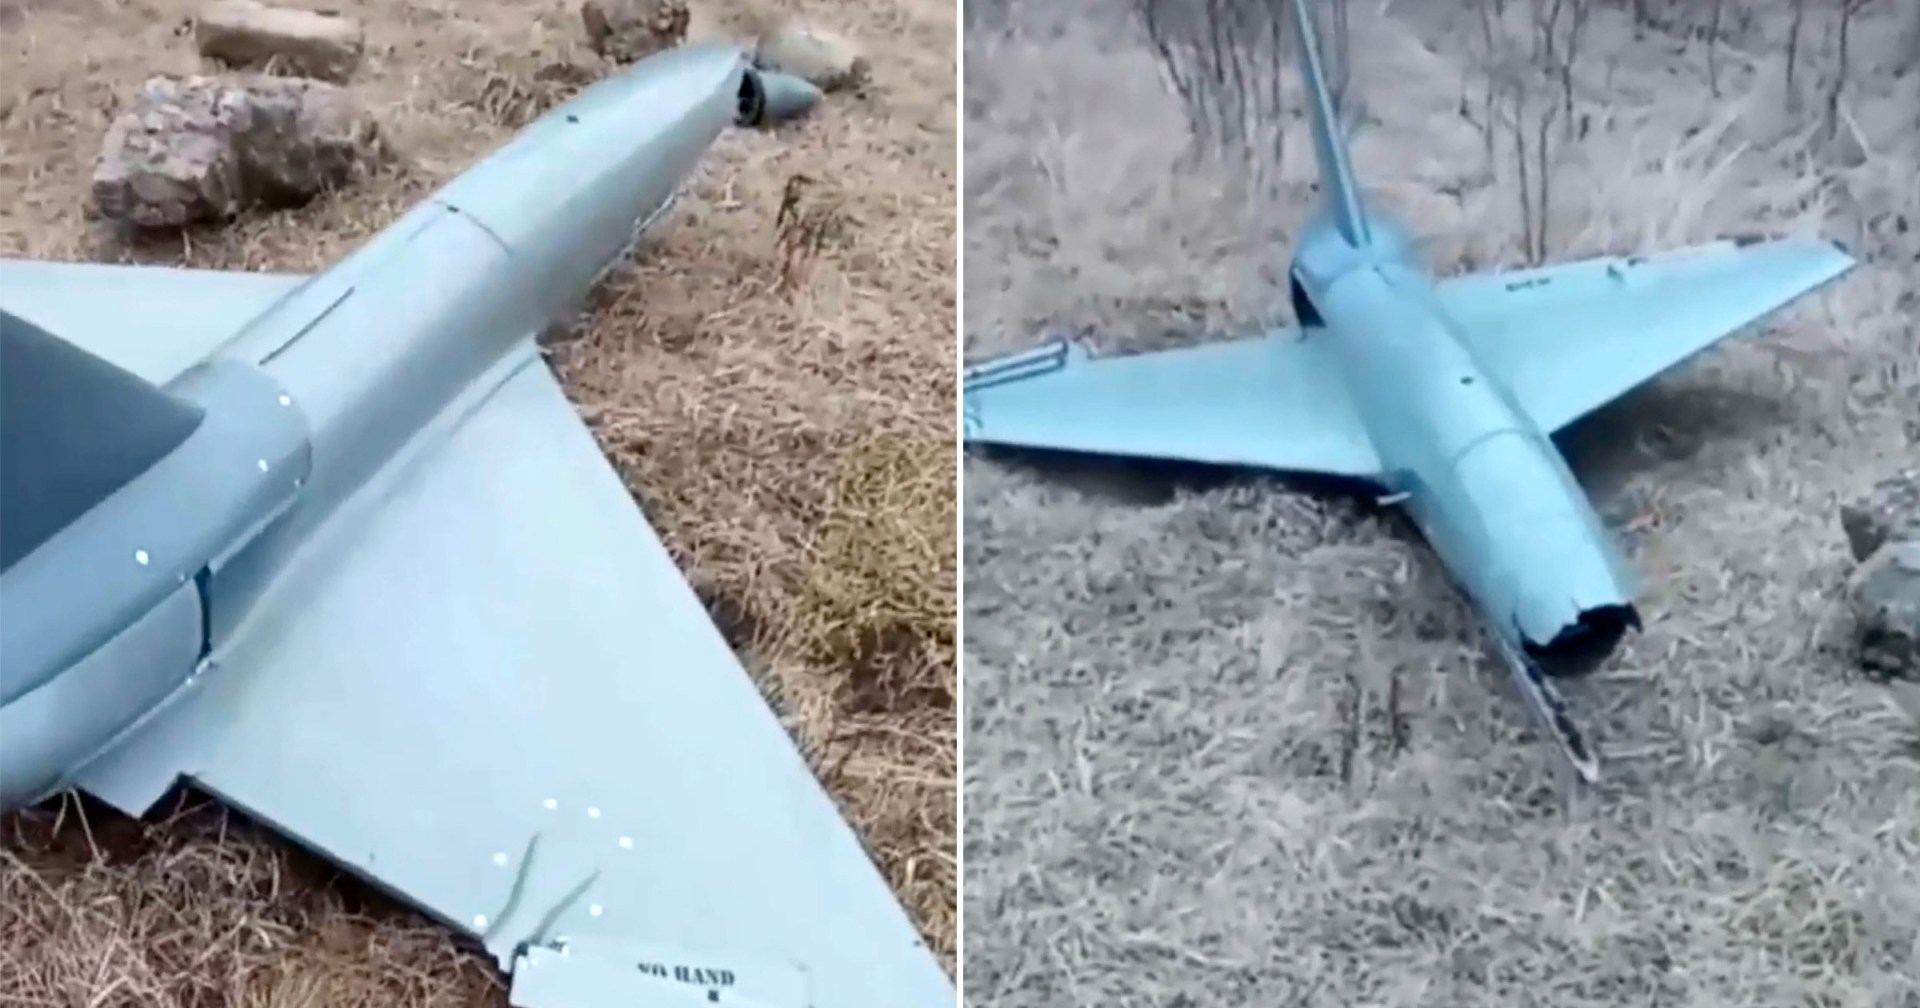 russia captures british 'kamikaze' drone actually used for target practice